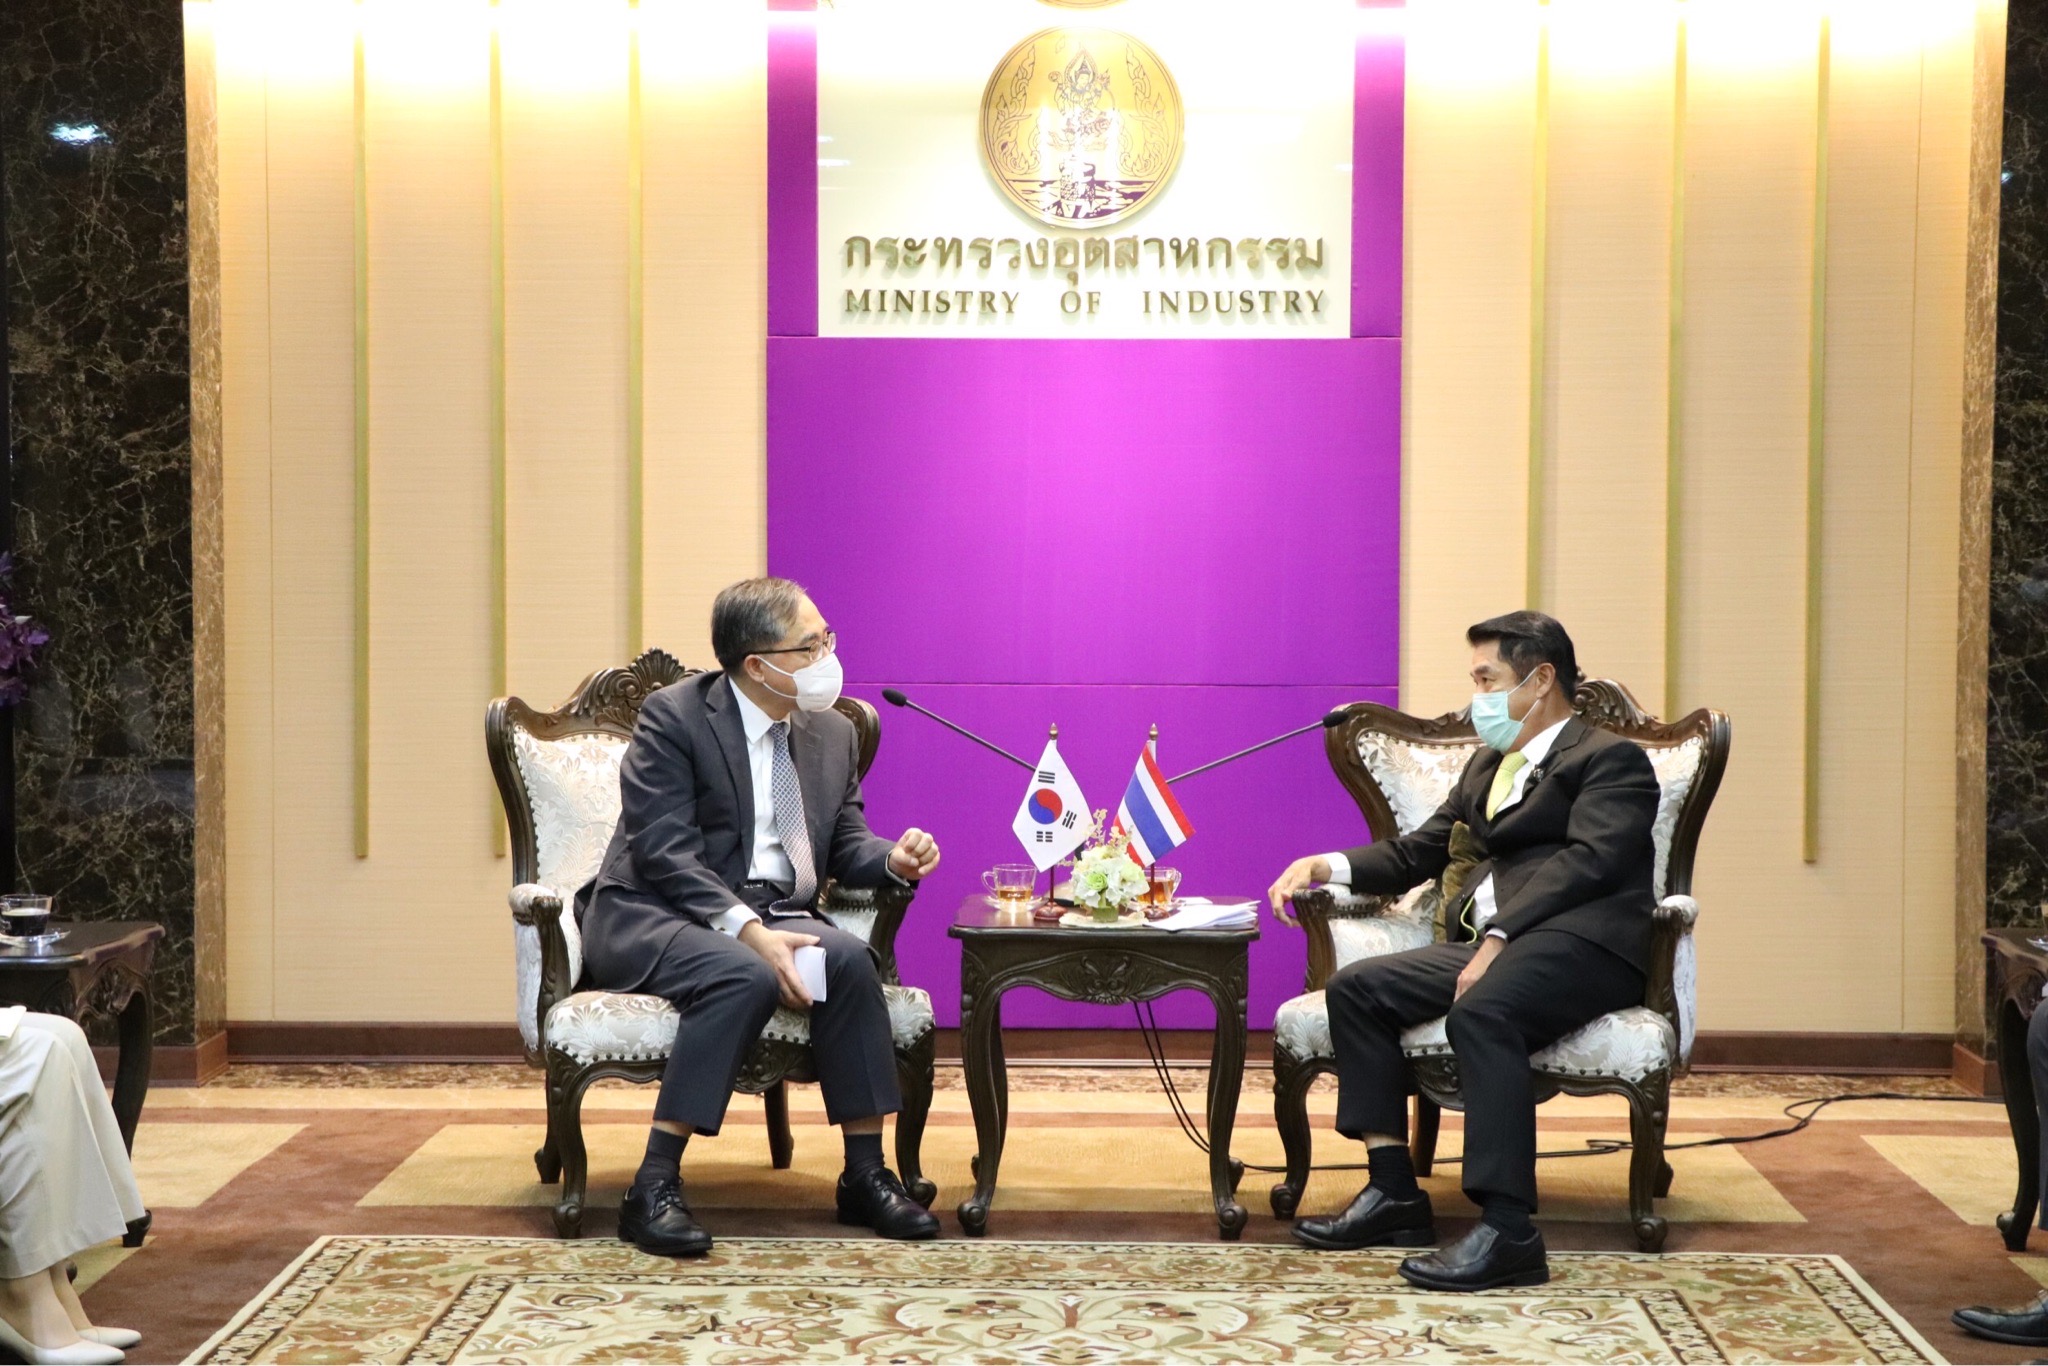 Ambassador Extraordinary and Plenipotentiary of the Republic of Korea to Thailand Meets with Mr. Suriya Juangroongruangkit, Minister of Industry